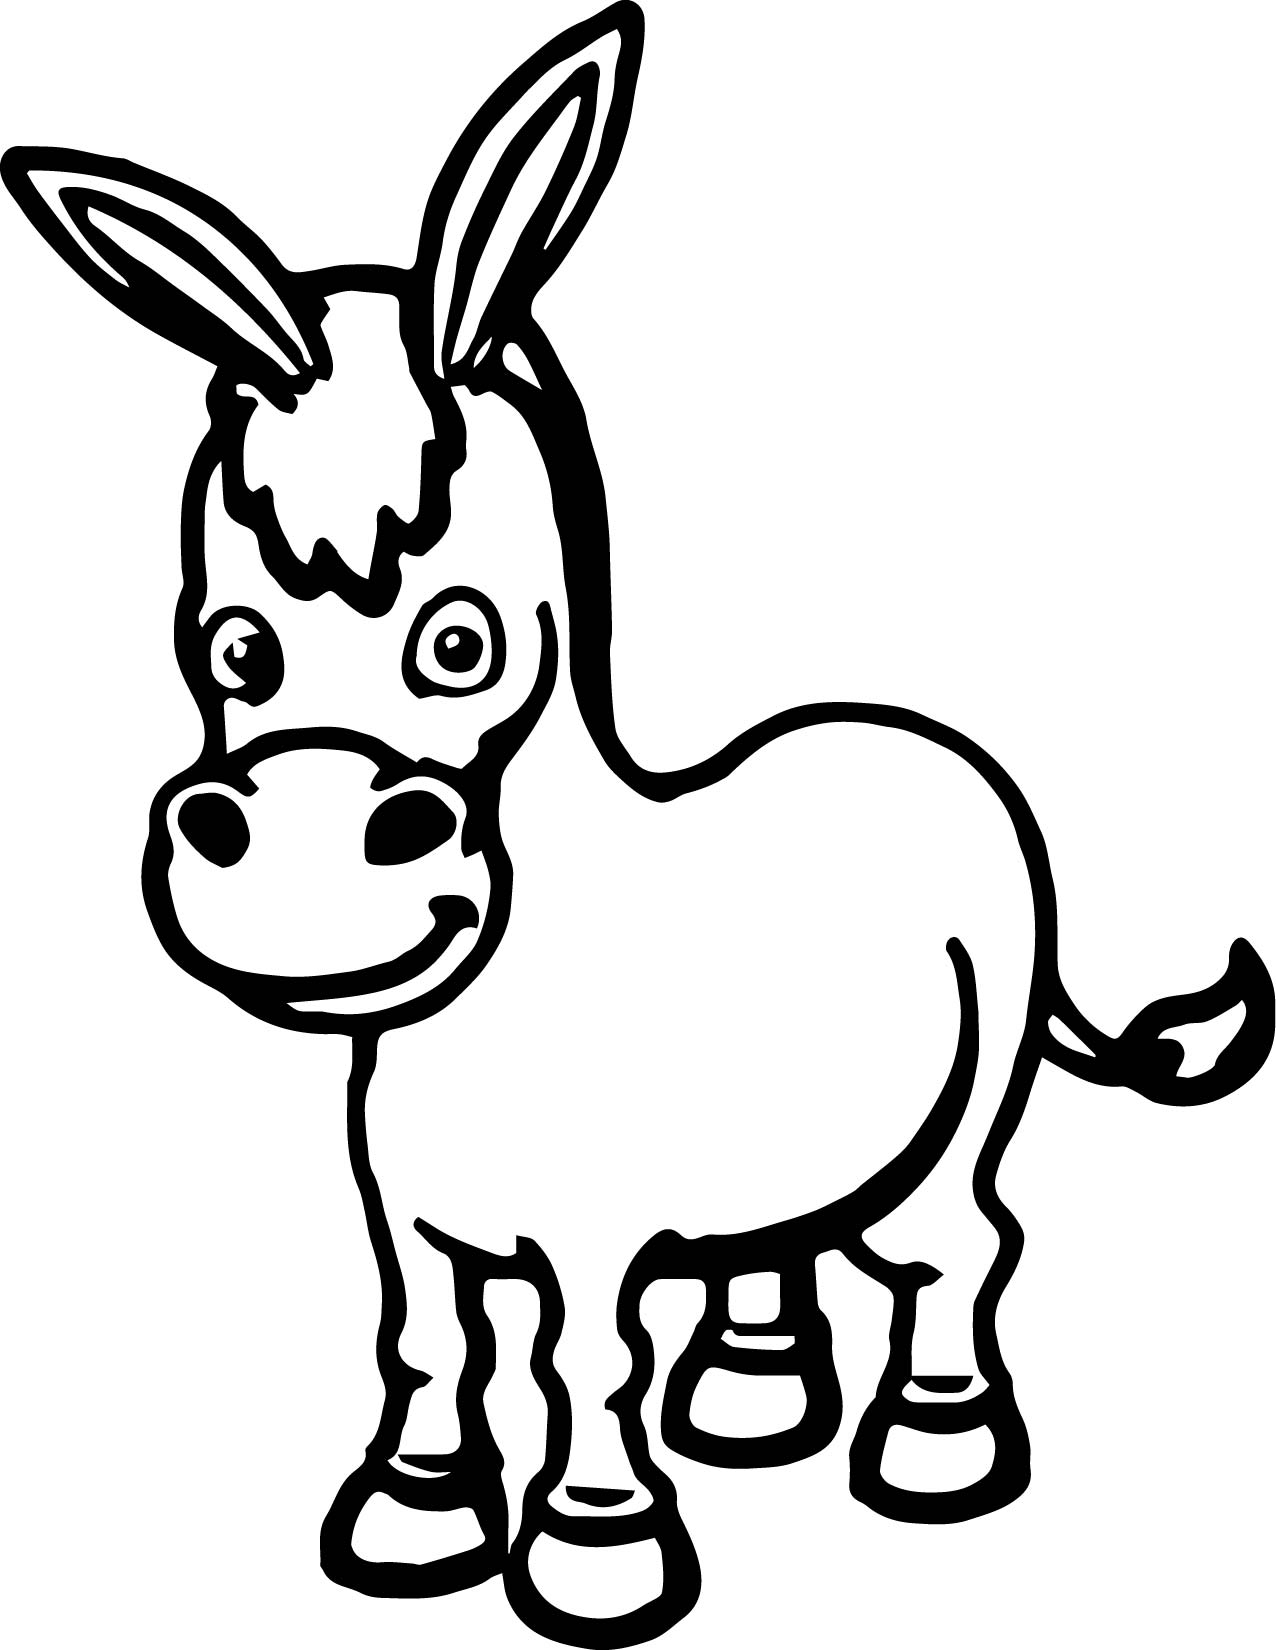 donkey-picture-cartoon-free-download-on-clipartmag